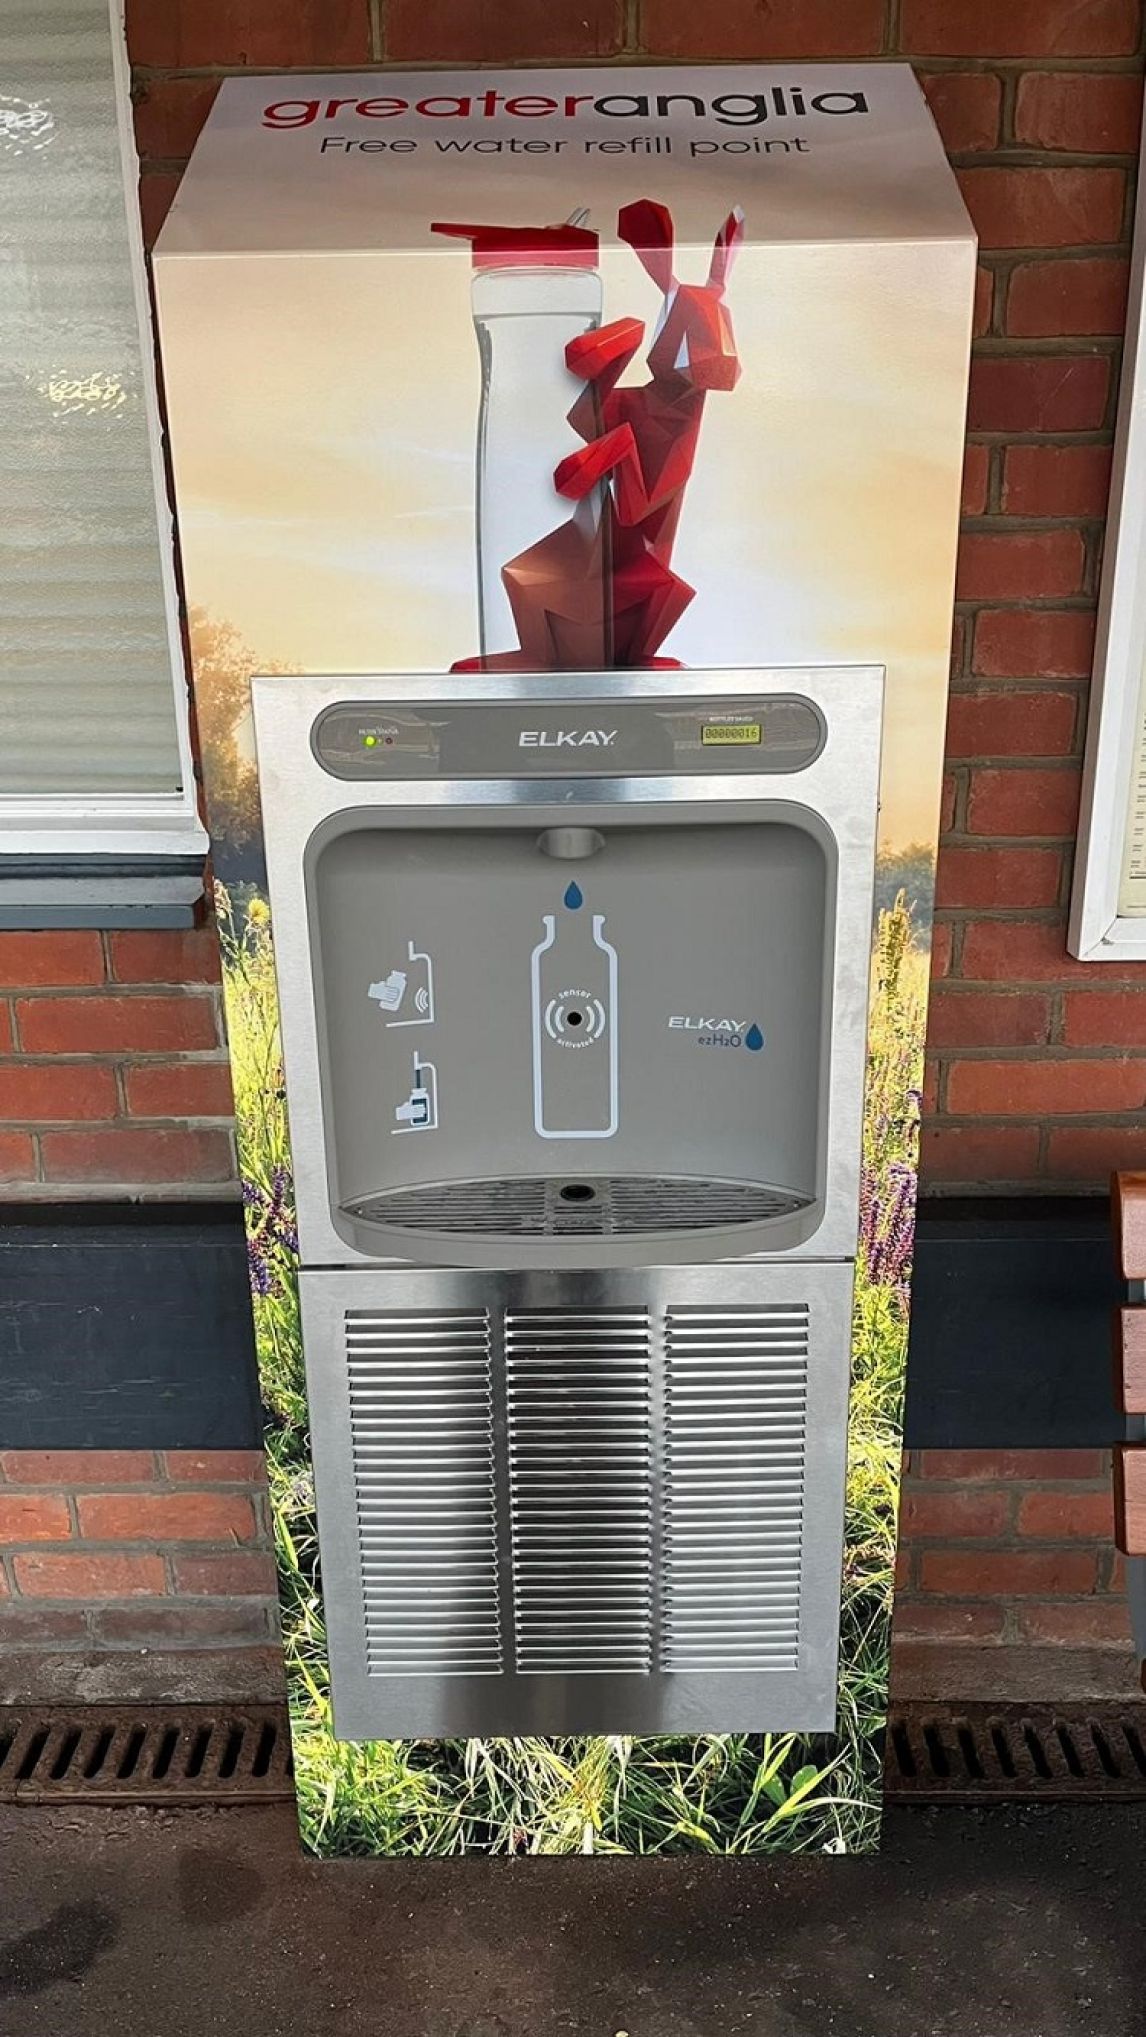 Greater Anglia water refill point